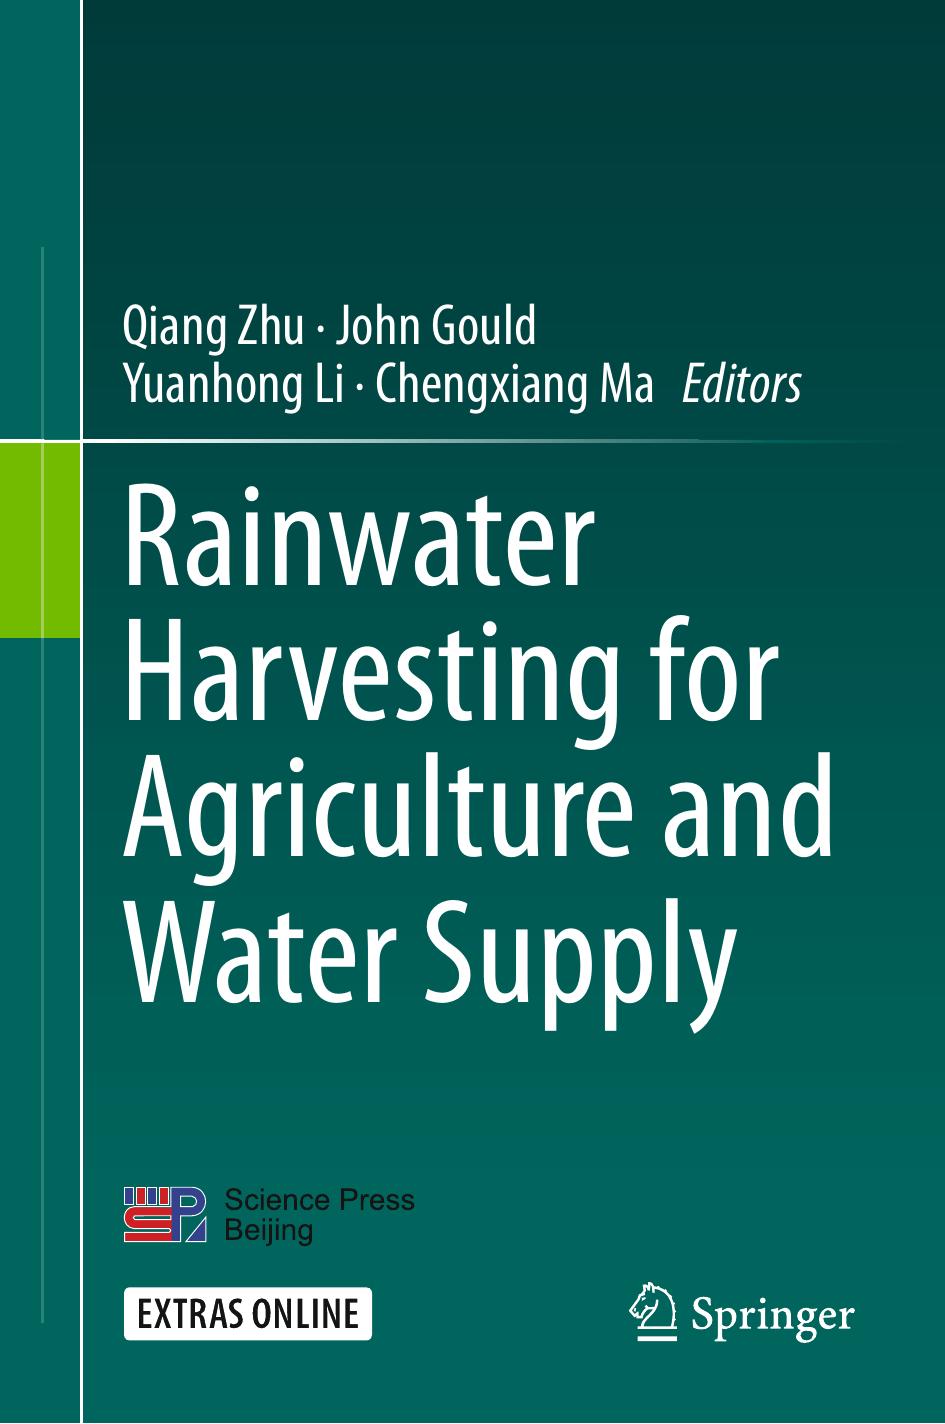 Rainwater Harvesting for Agriculture and Water Supply 2015